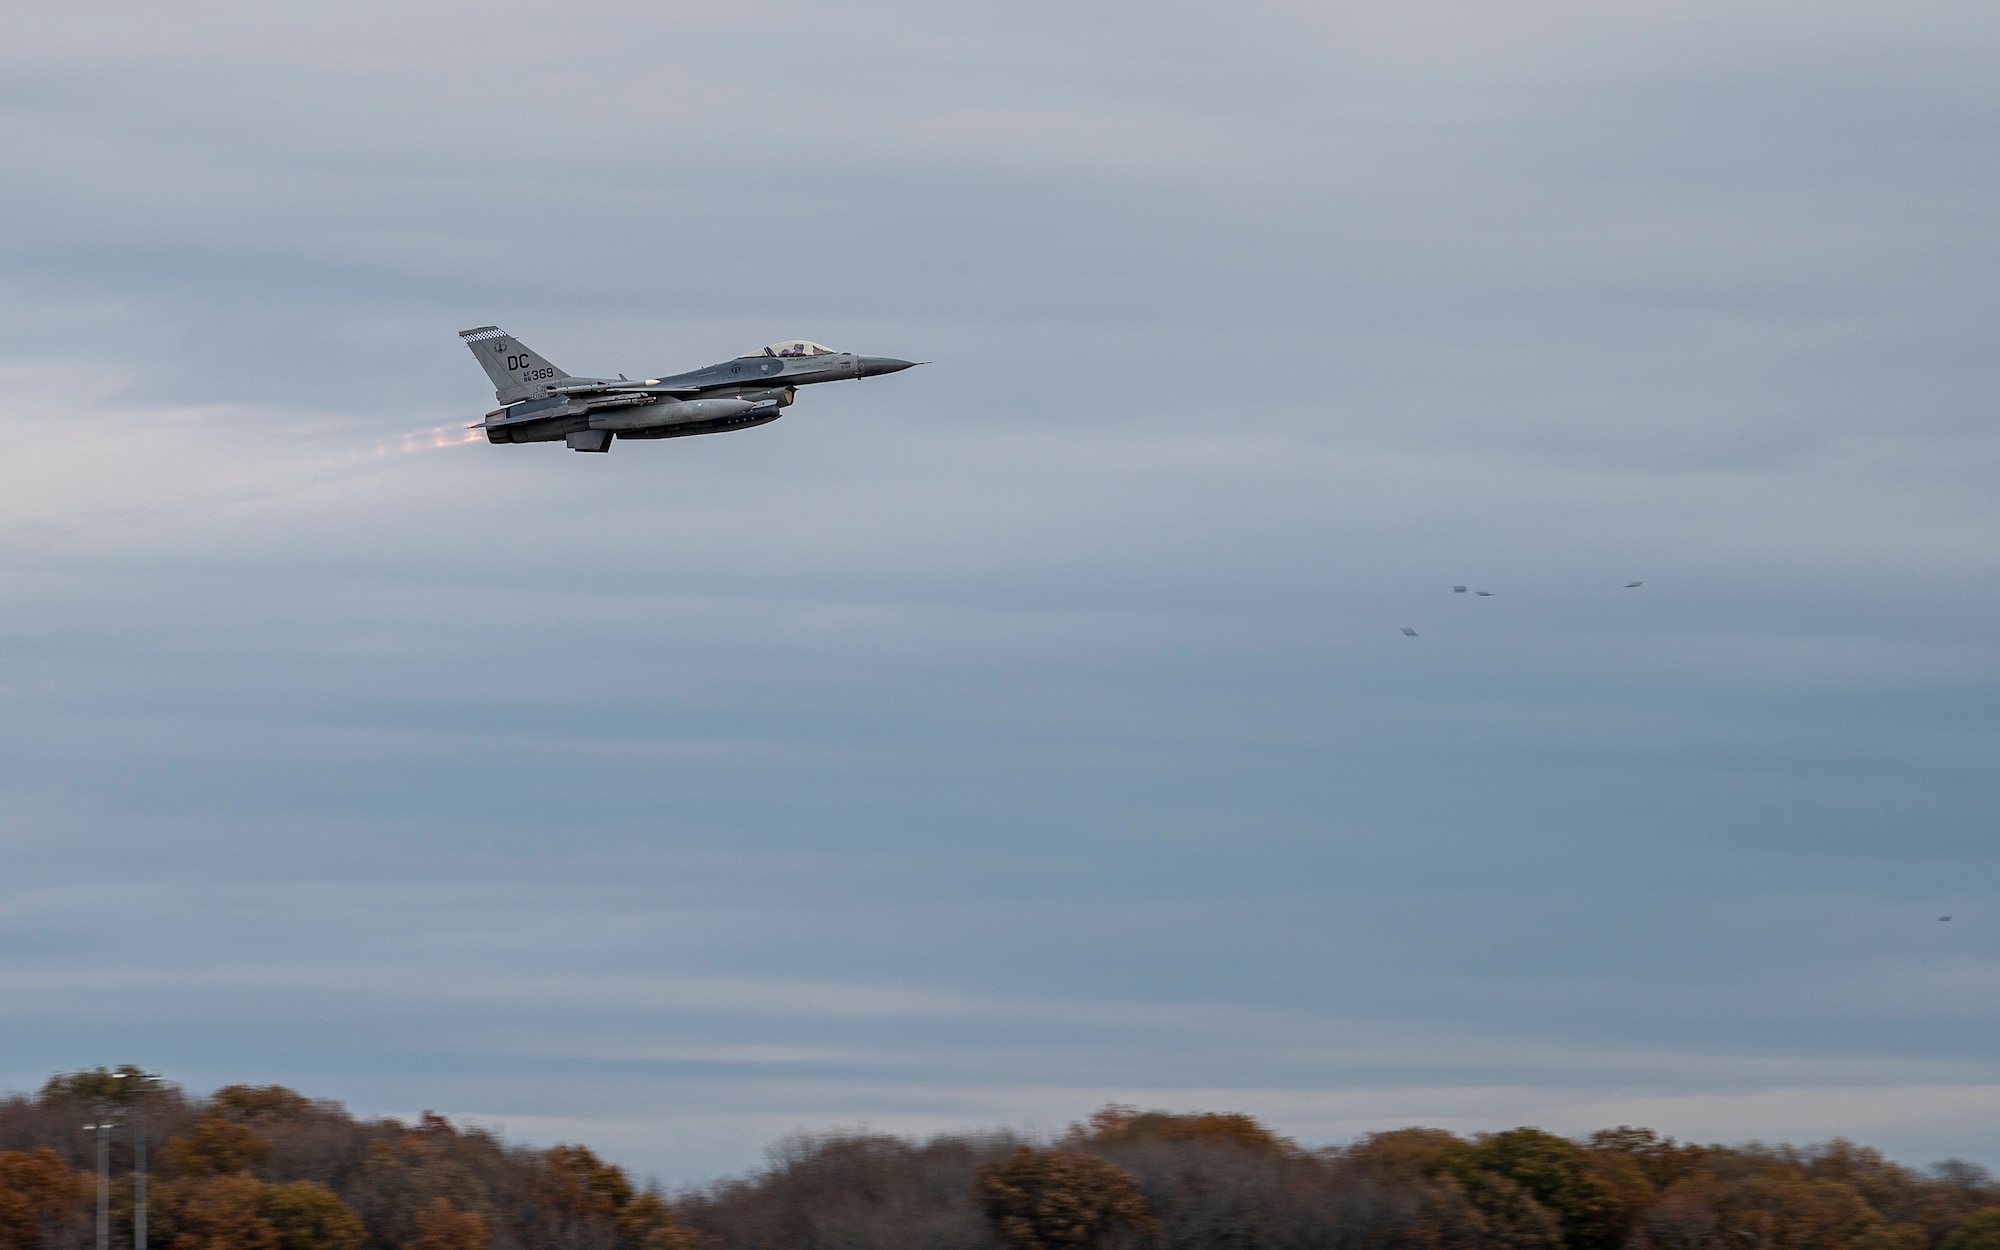 An F-16 Fighting Falcon, assigned to the 121st Fighter Squadron at Joint Base Andrews, Maryland, takes off at Dover Air Force Base, Delaware, Nov. 25, 2020. The aircraft stopped at Dover Air Force Base during routine flight training operations. The base prioritizes providing unrivaled installation support for mission partners, transit aircraft and neighboring installations. (U.S. Air Force photo by Senior Airman Christopher Quail)